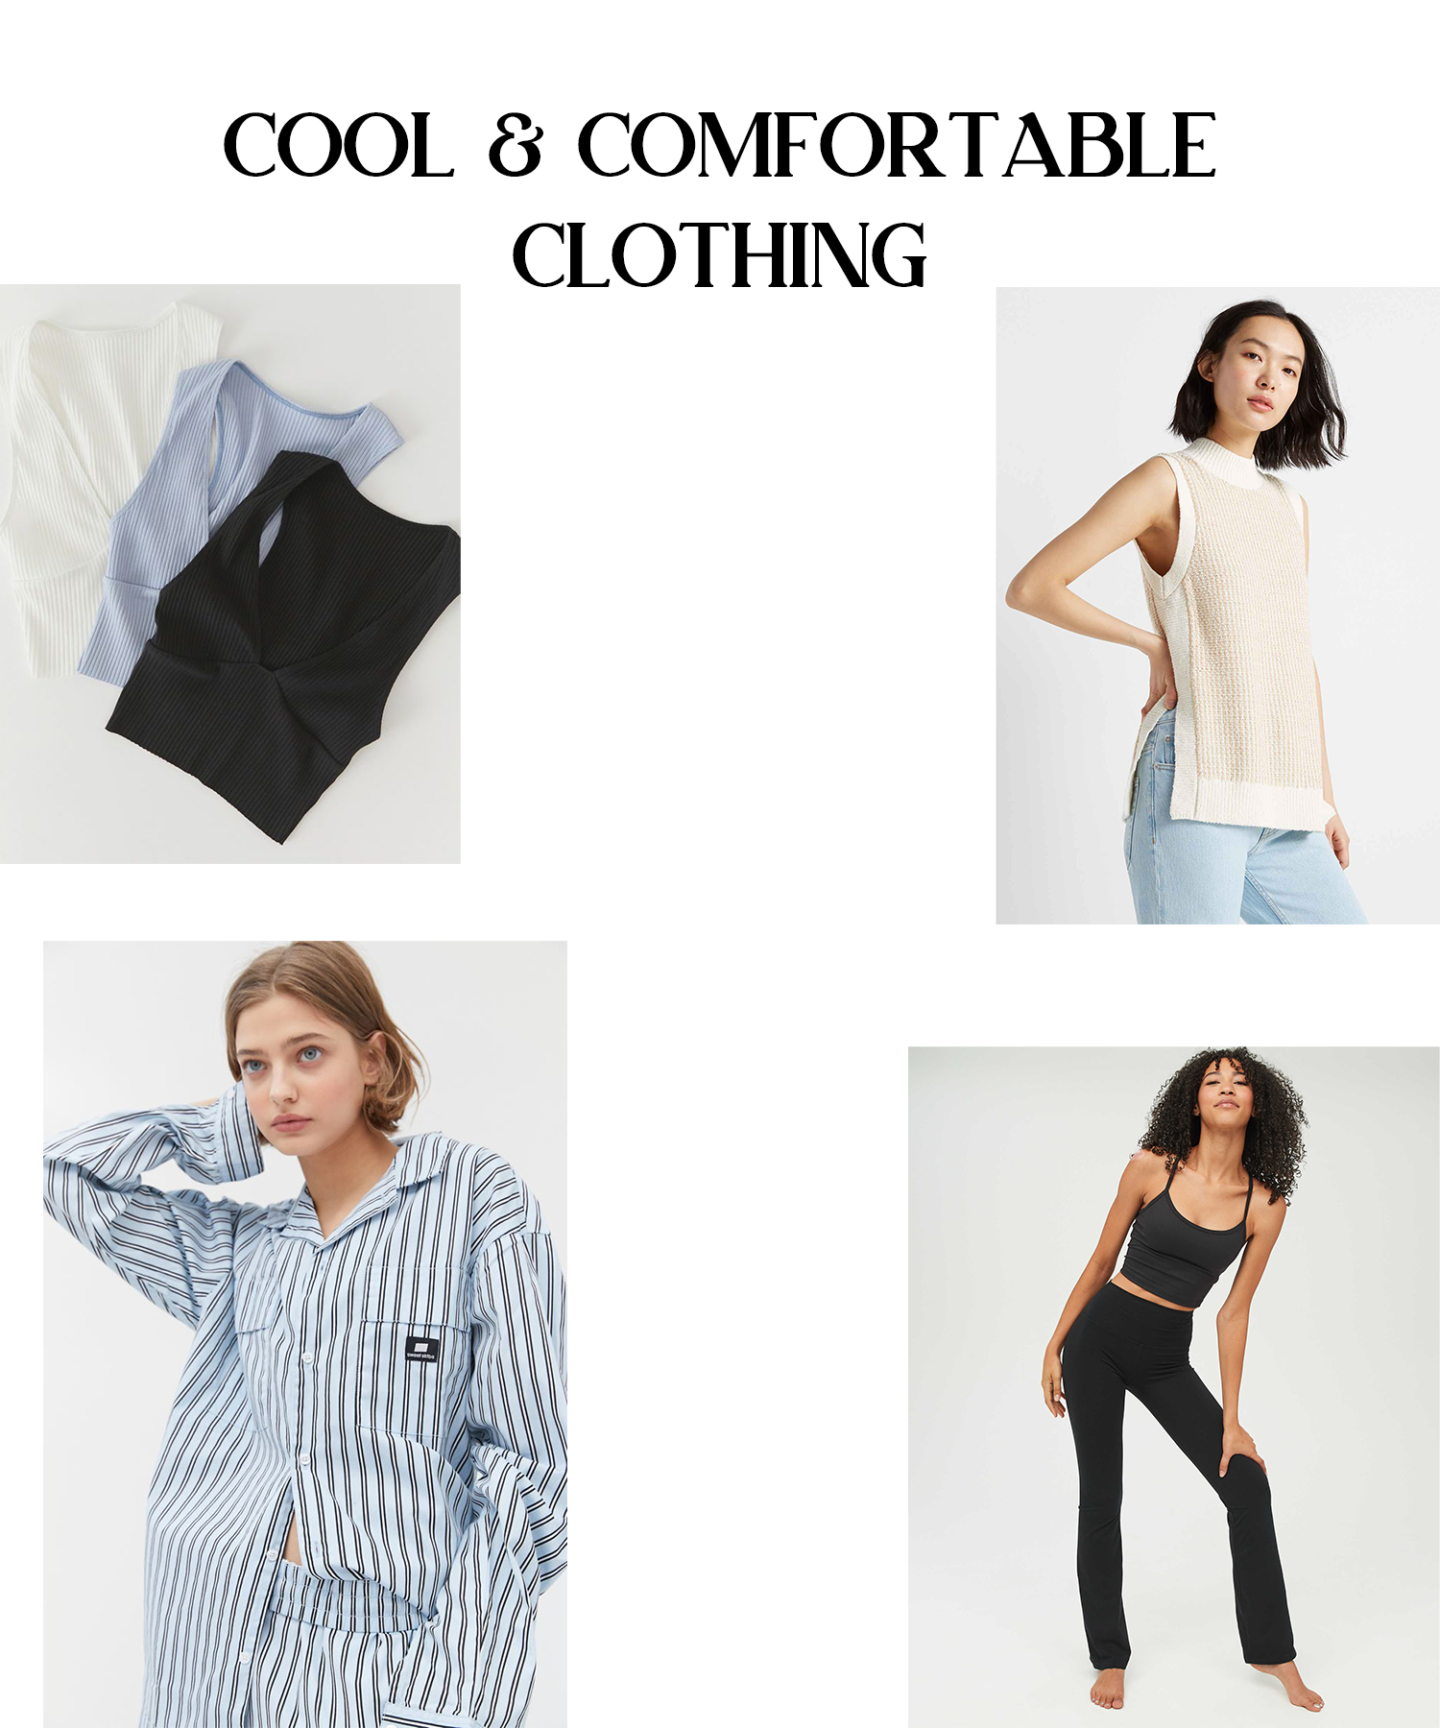 Cool & Comfortable Clothing